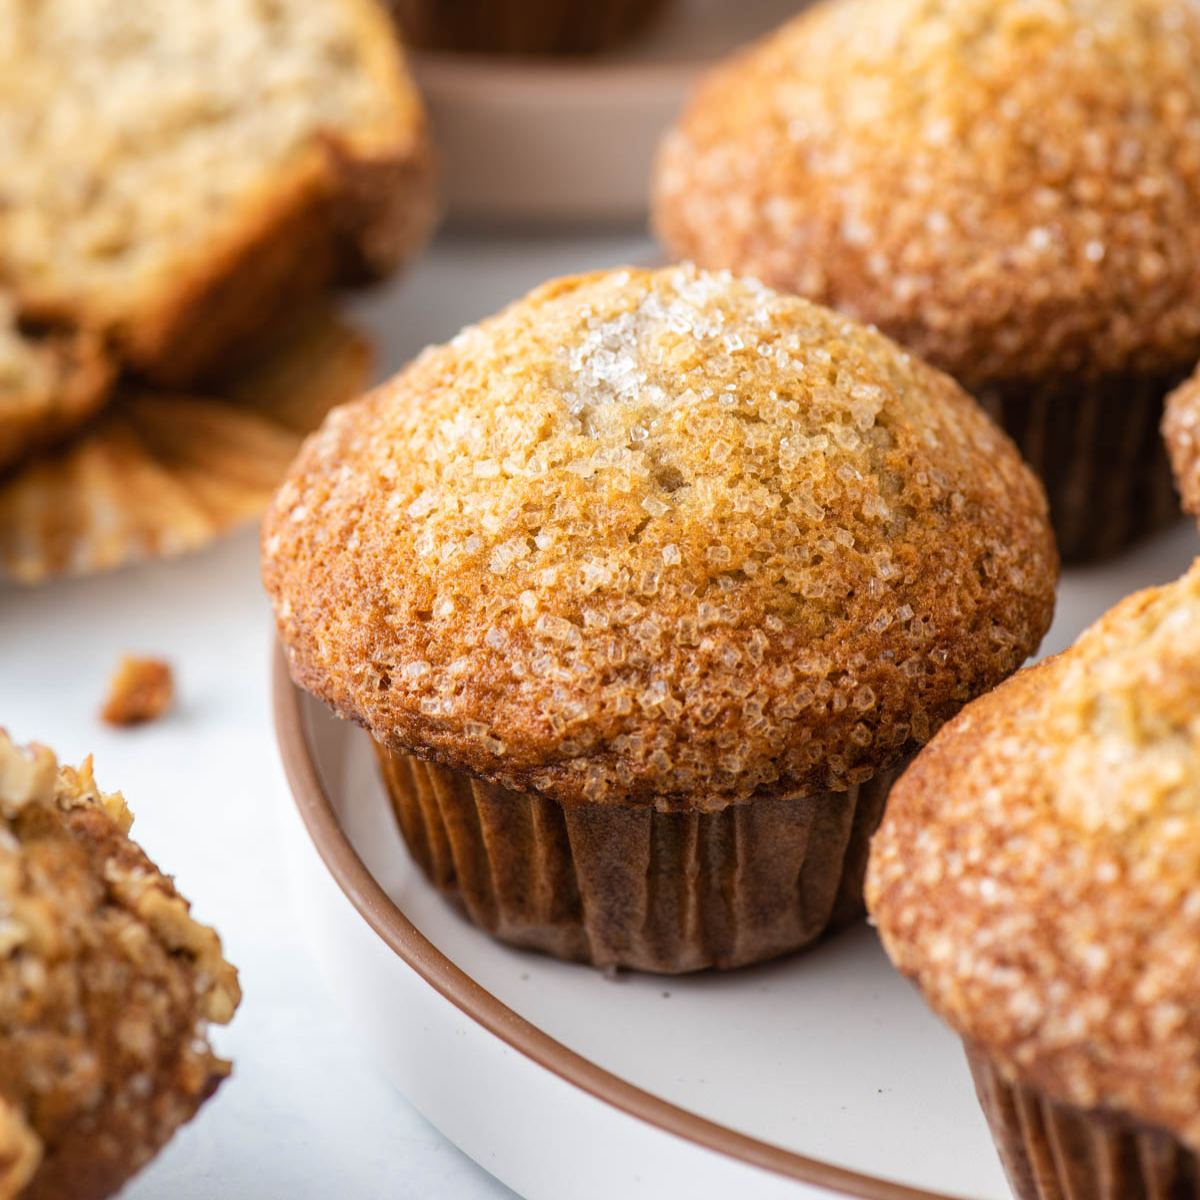 https://thefirstyearblog.com/wp-content/uploads/2022/01/Gluten-Free-Banana-Muffins-Square-2023.png